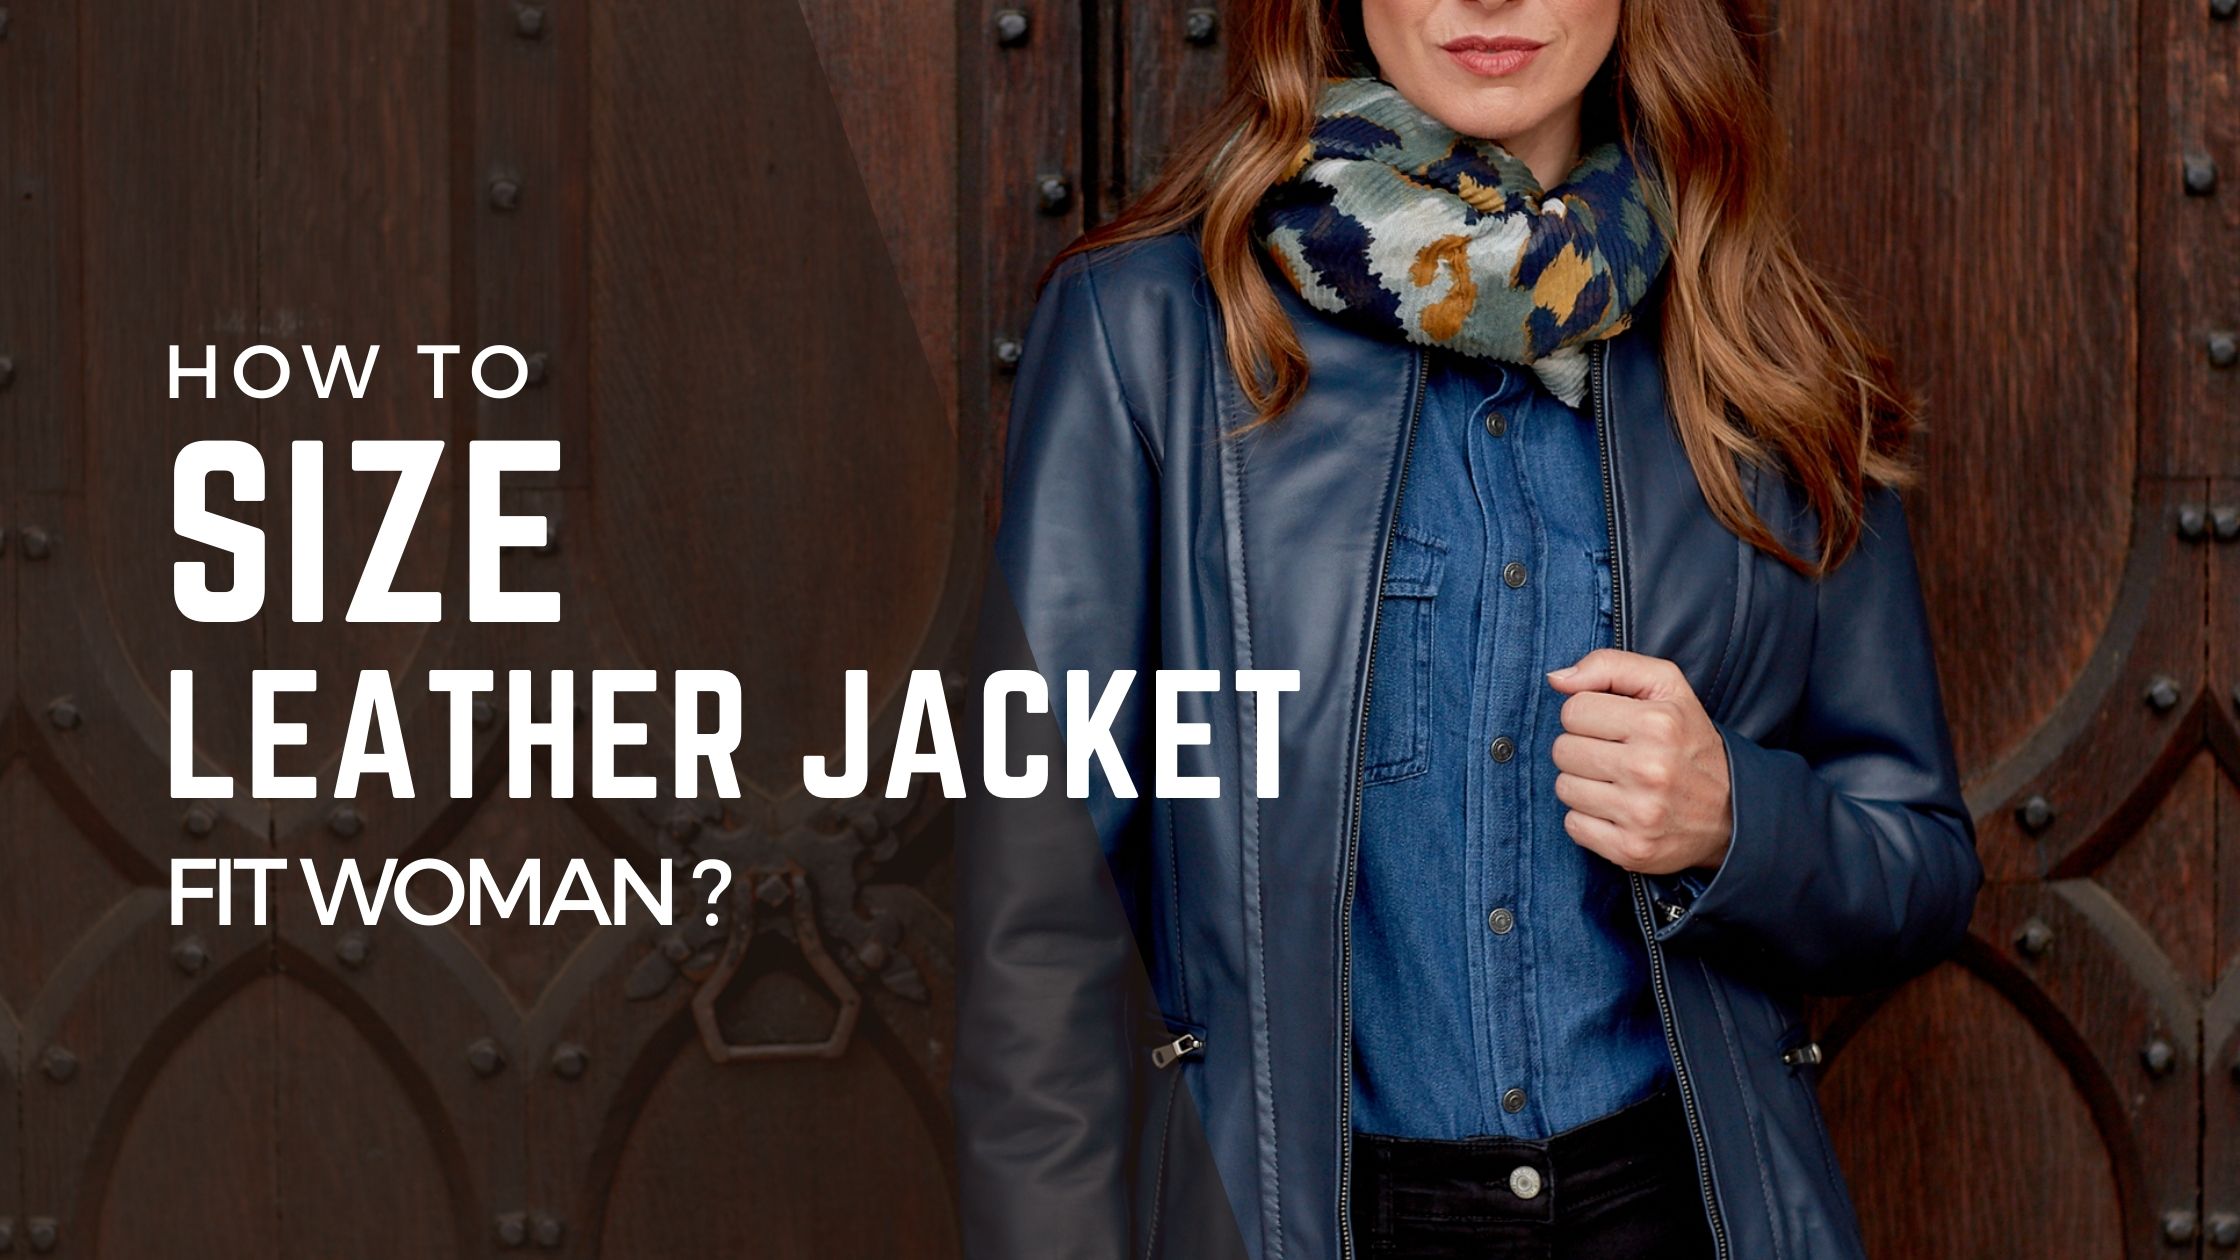 How do you Size a Leather Jacket fit Woman